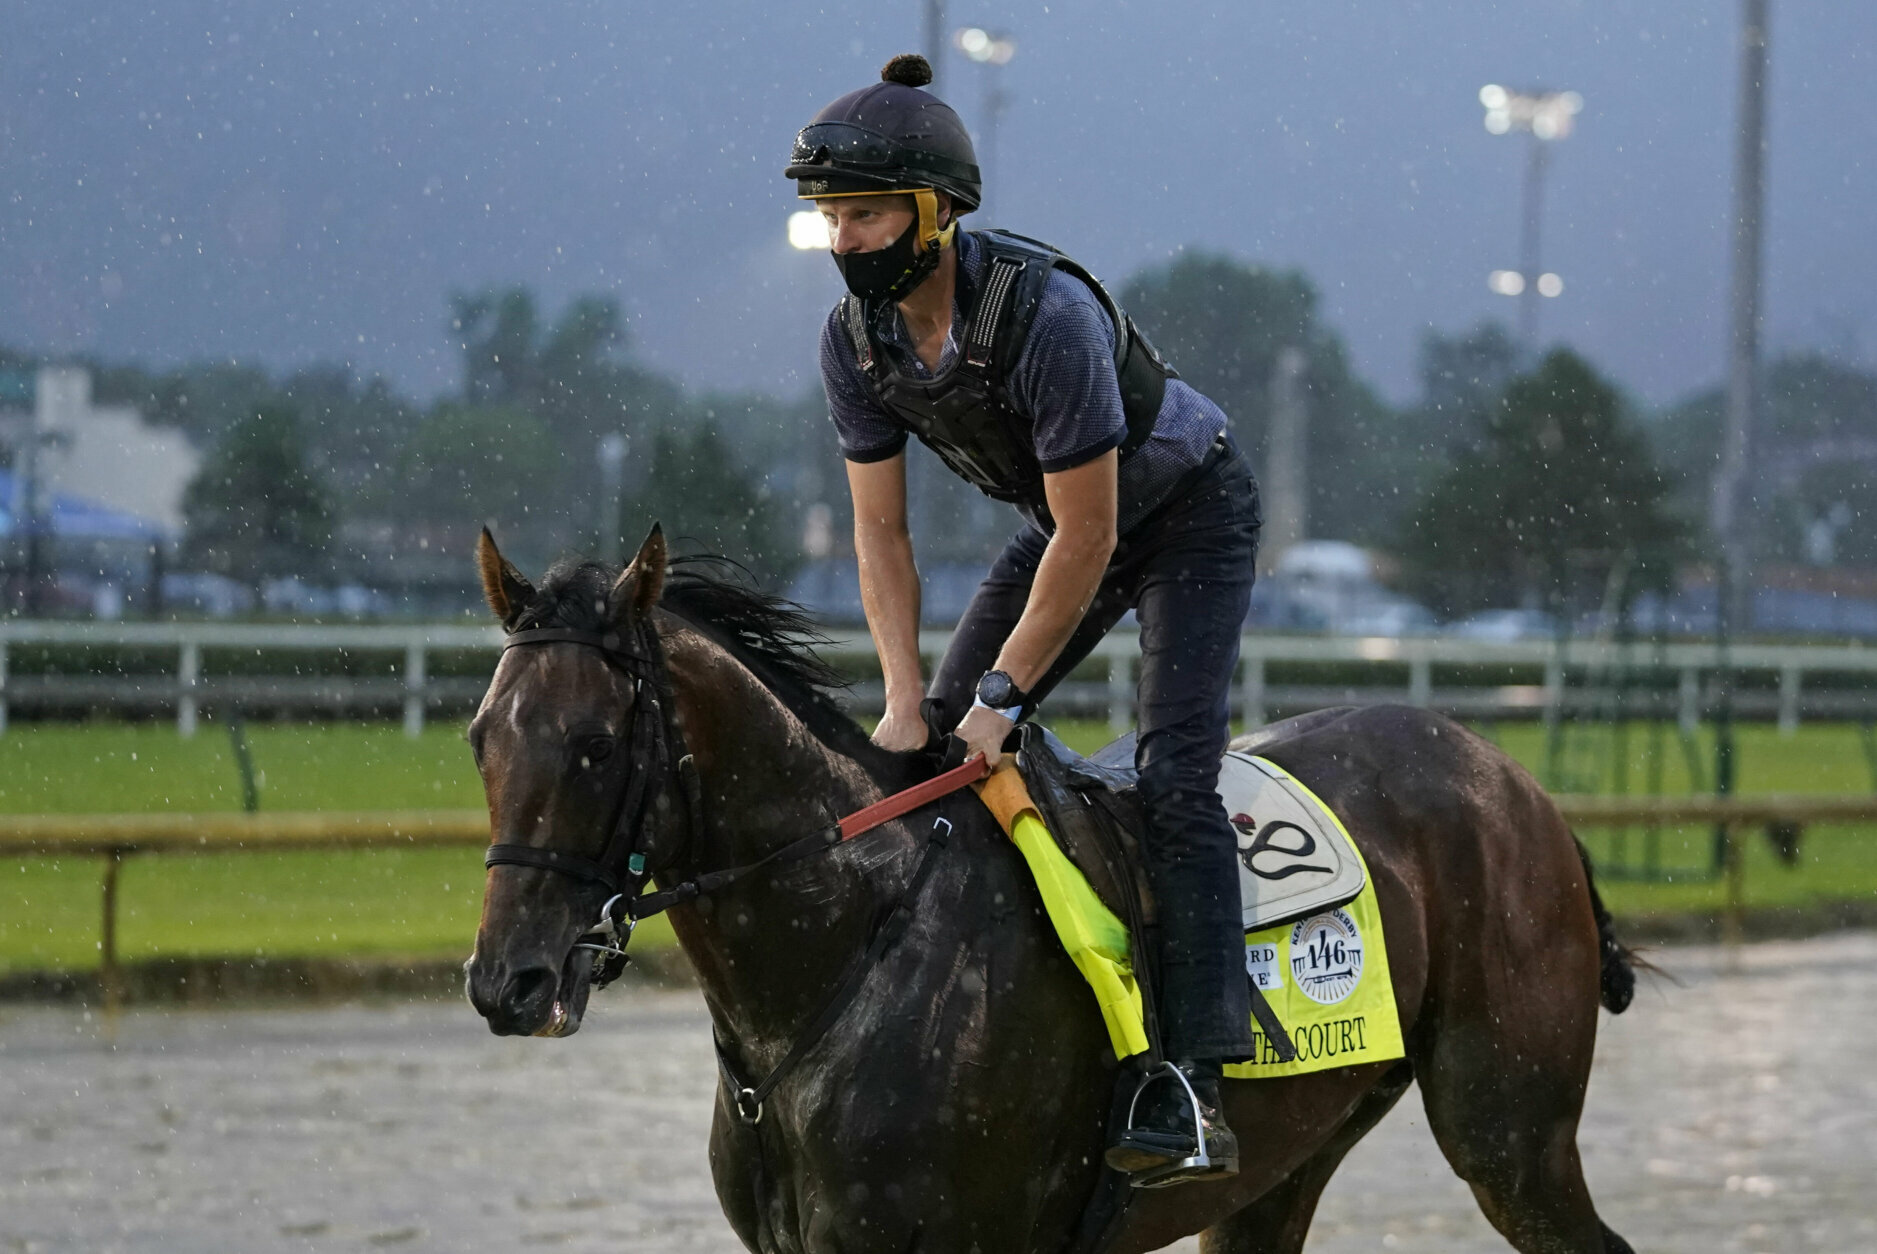 Kentucky Derby entry Storm the Court runs during a workout at Churchill Downs, Thursday, Sept. 3, 2020, in Louisville, Ky. The Kentucky Derby is scheduled for Saturday, Sept. 5th. (AP Photo/Darron Cummings)